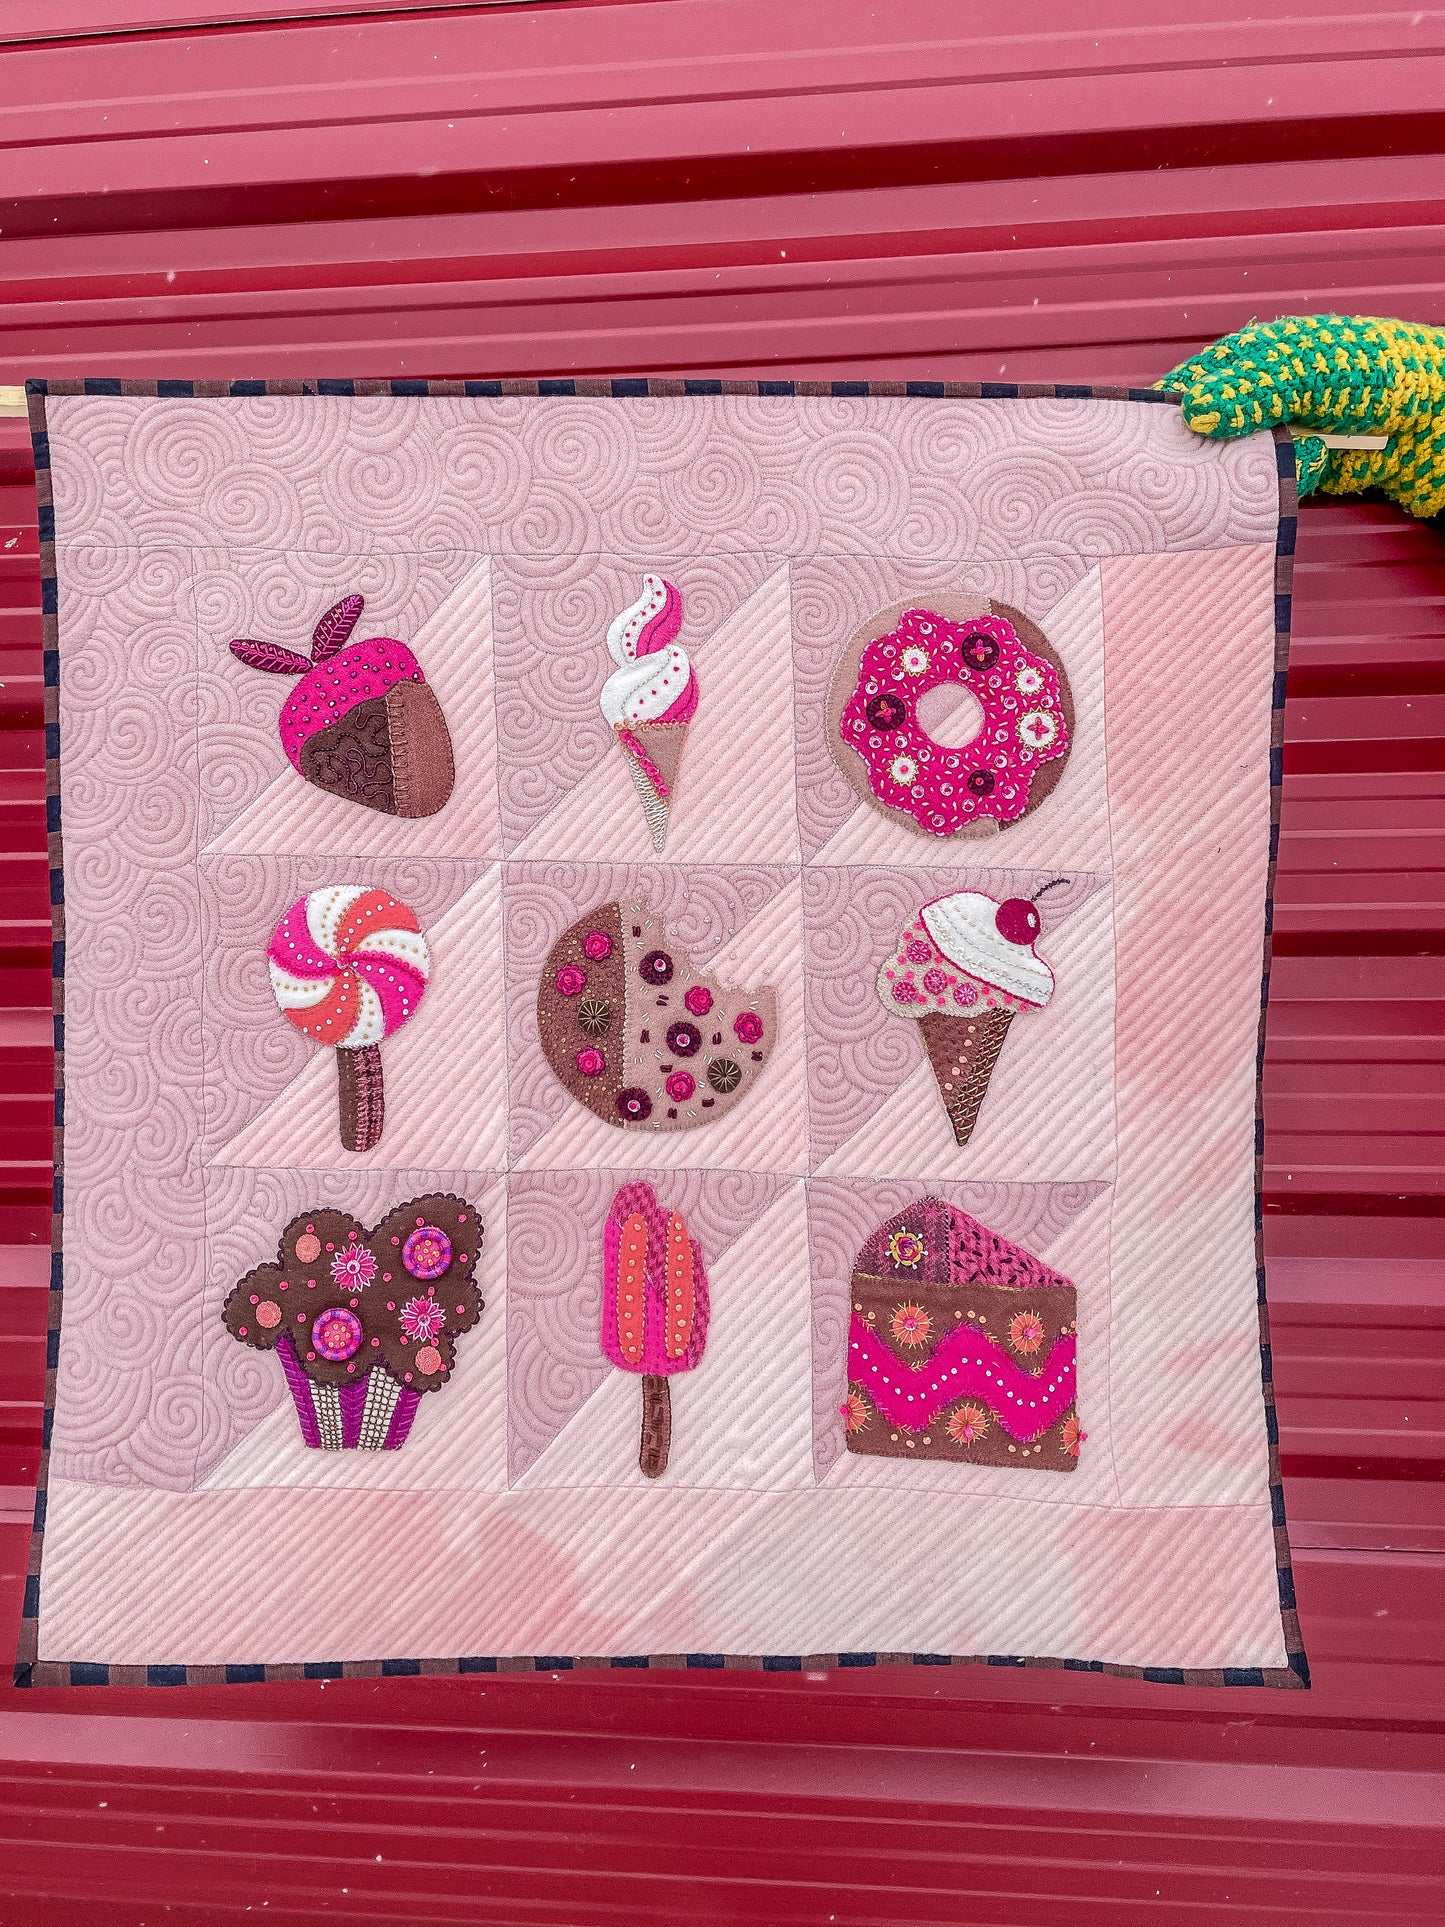 Sprinkles and Stitches PDF Pattern Book - Kathleen Riggins